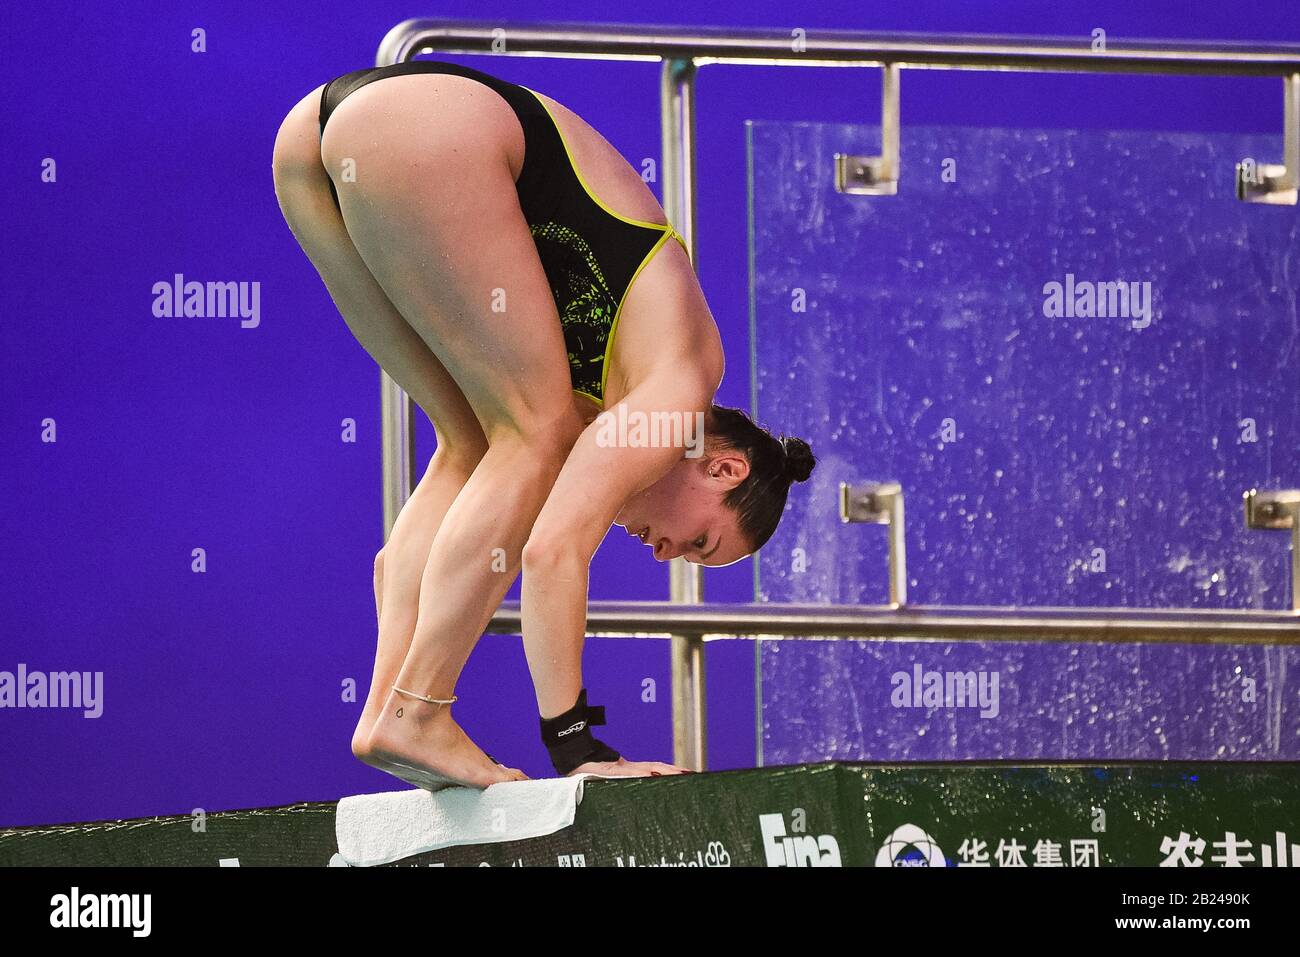 Montreal, Quebec, Canada. February 29, 2020: Celine Van Duijn (NED) dives during the FINA Diving World Series Women's 10m platform semifinal at Olympic Stadium in David Kirouac/CSM Stock Photo